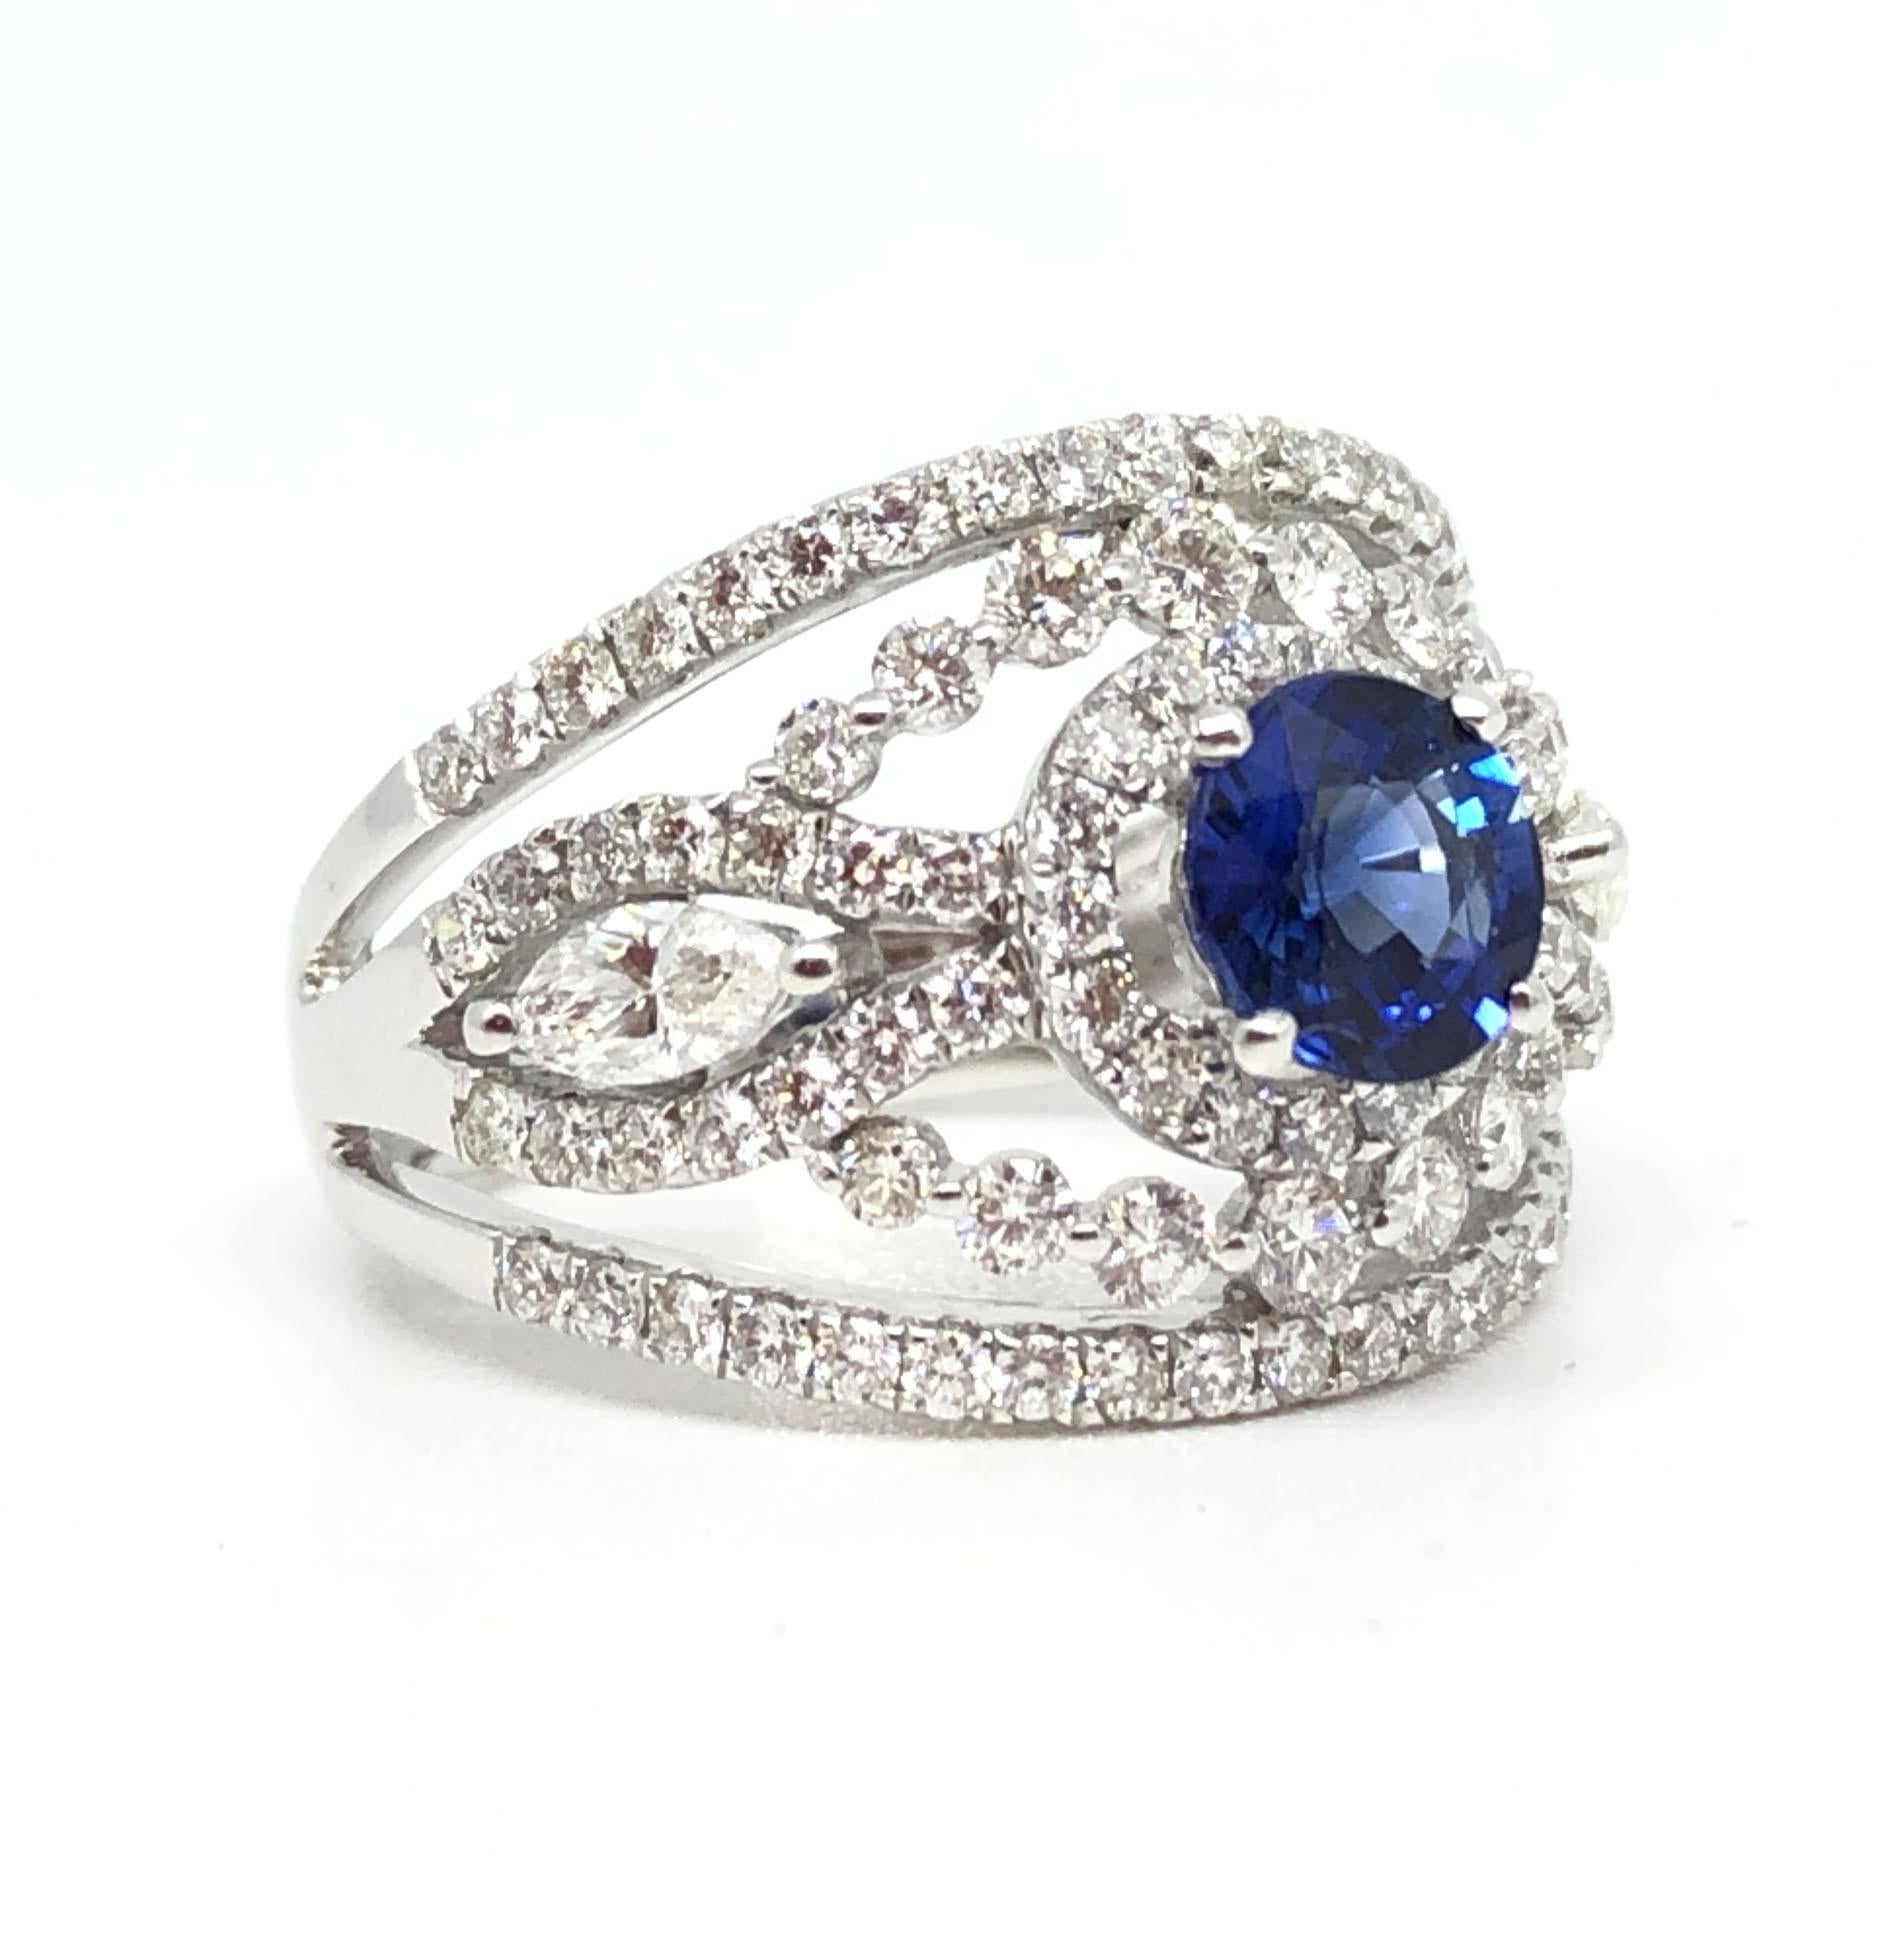 A beautiful Sapphire Diamond Ring from GILIN, featuring 1.04 Carat Blue Sapphire and 1.44 Carat Diamonds cocktail Ring

 size is US 6.